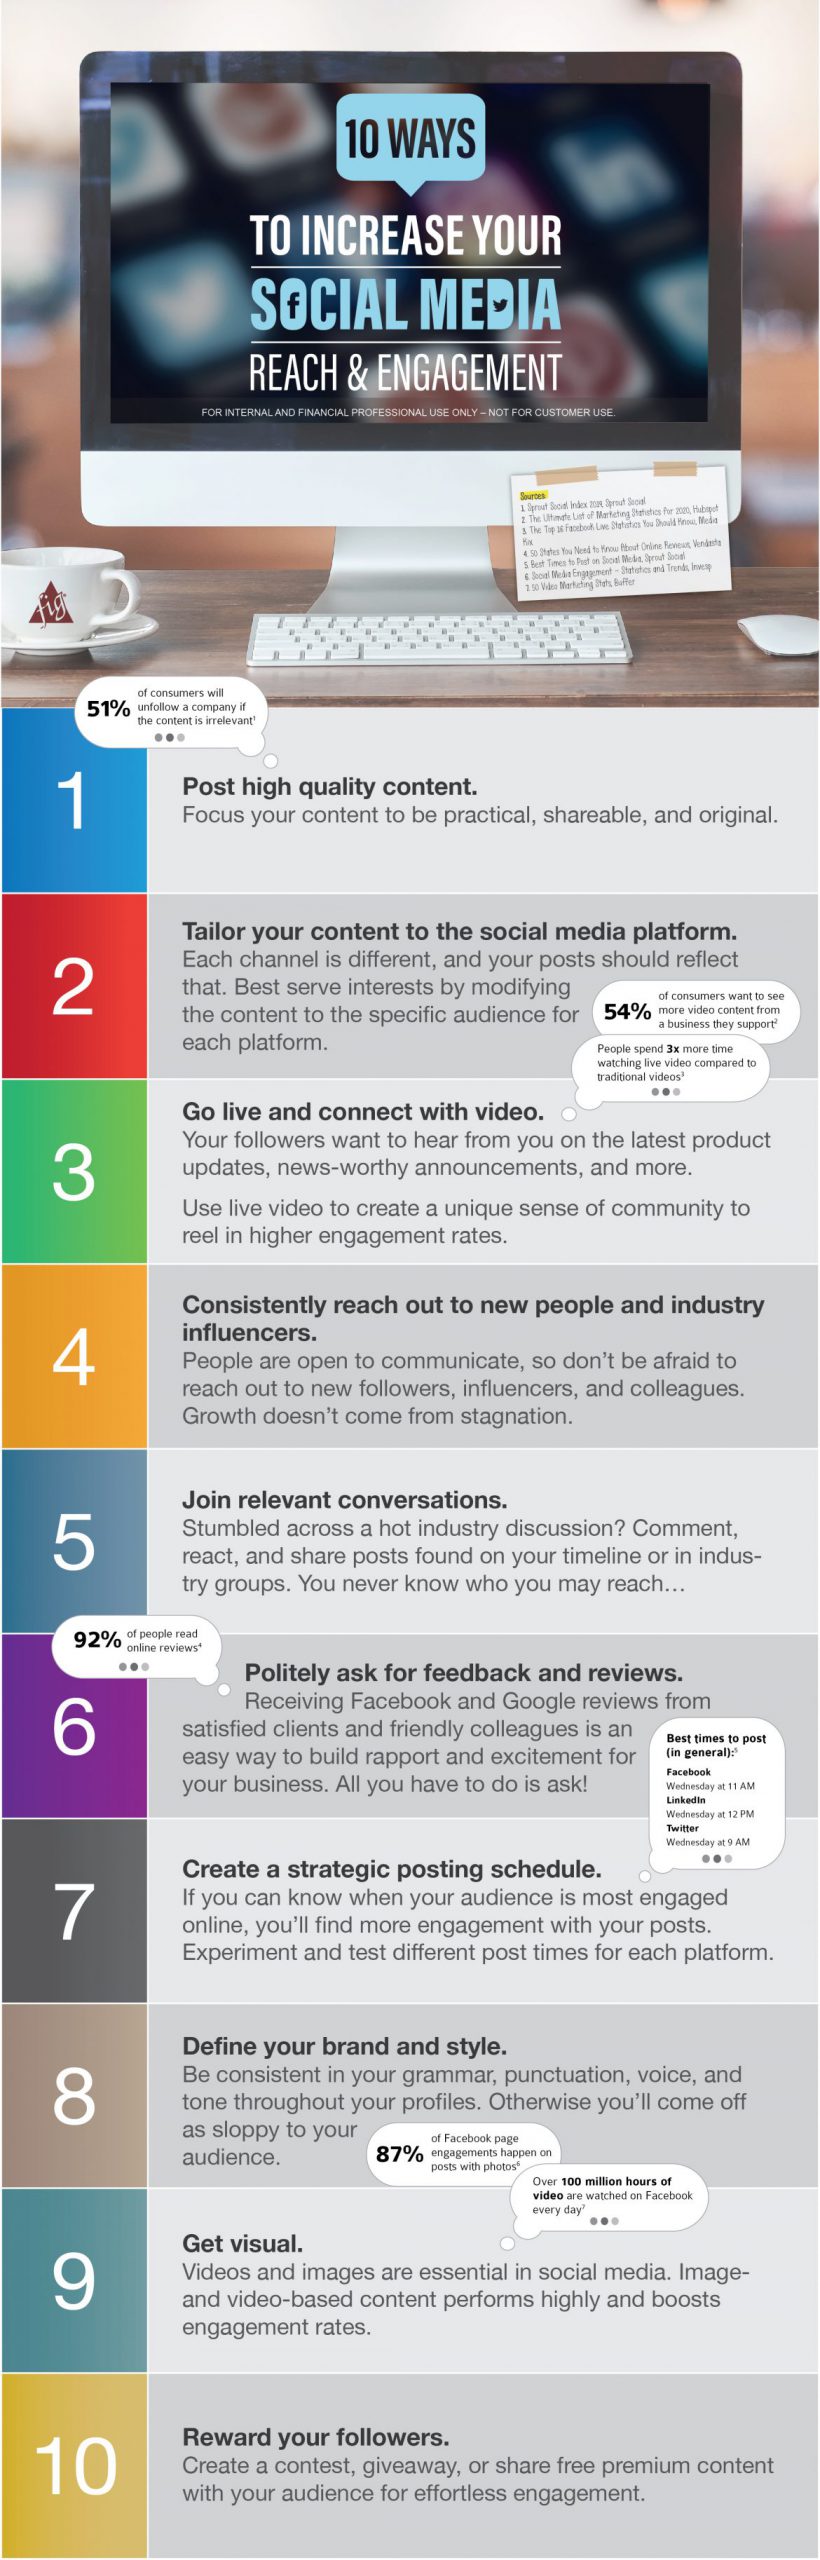 10 ways to increase your social media reach and engagement infographic scaled 1